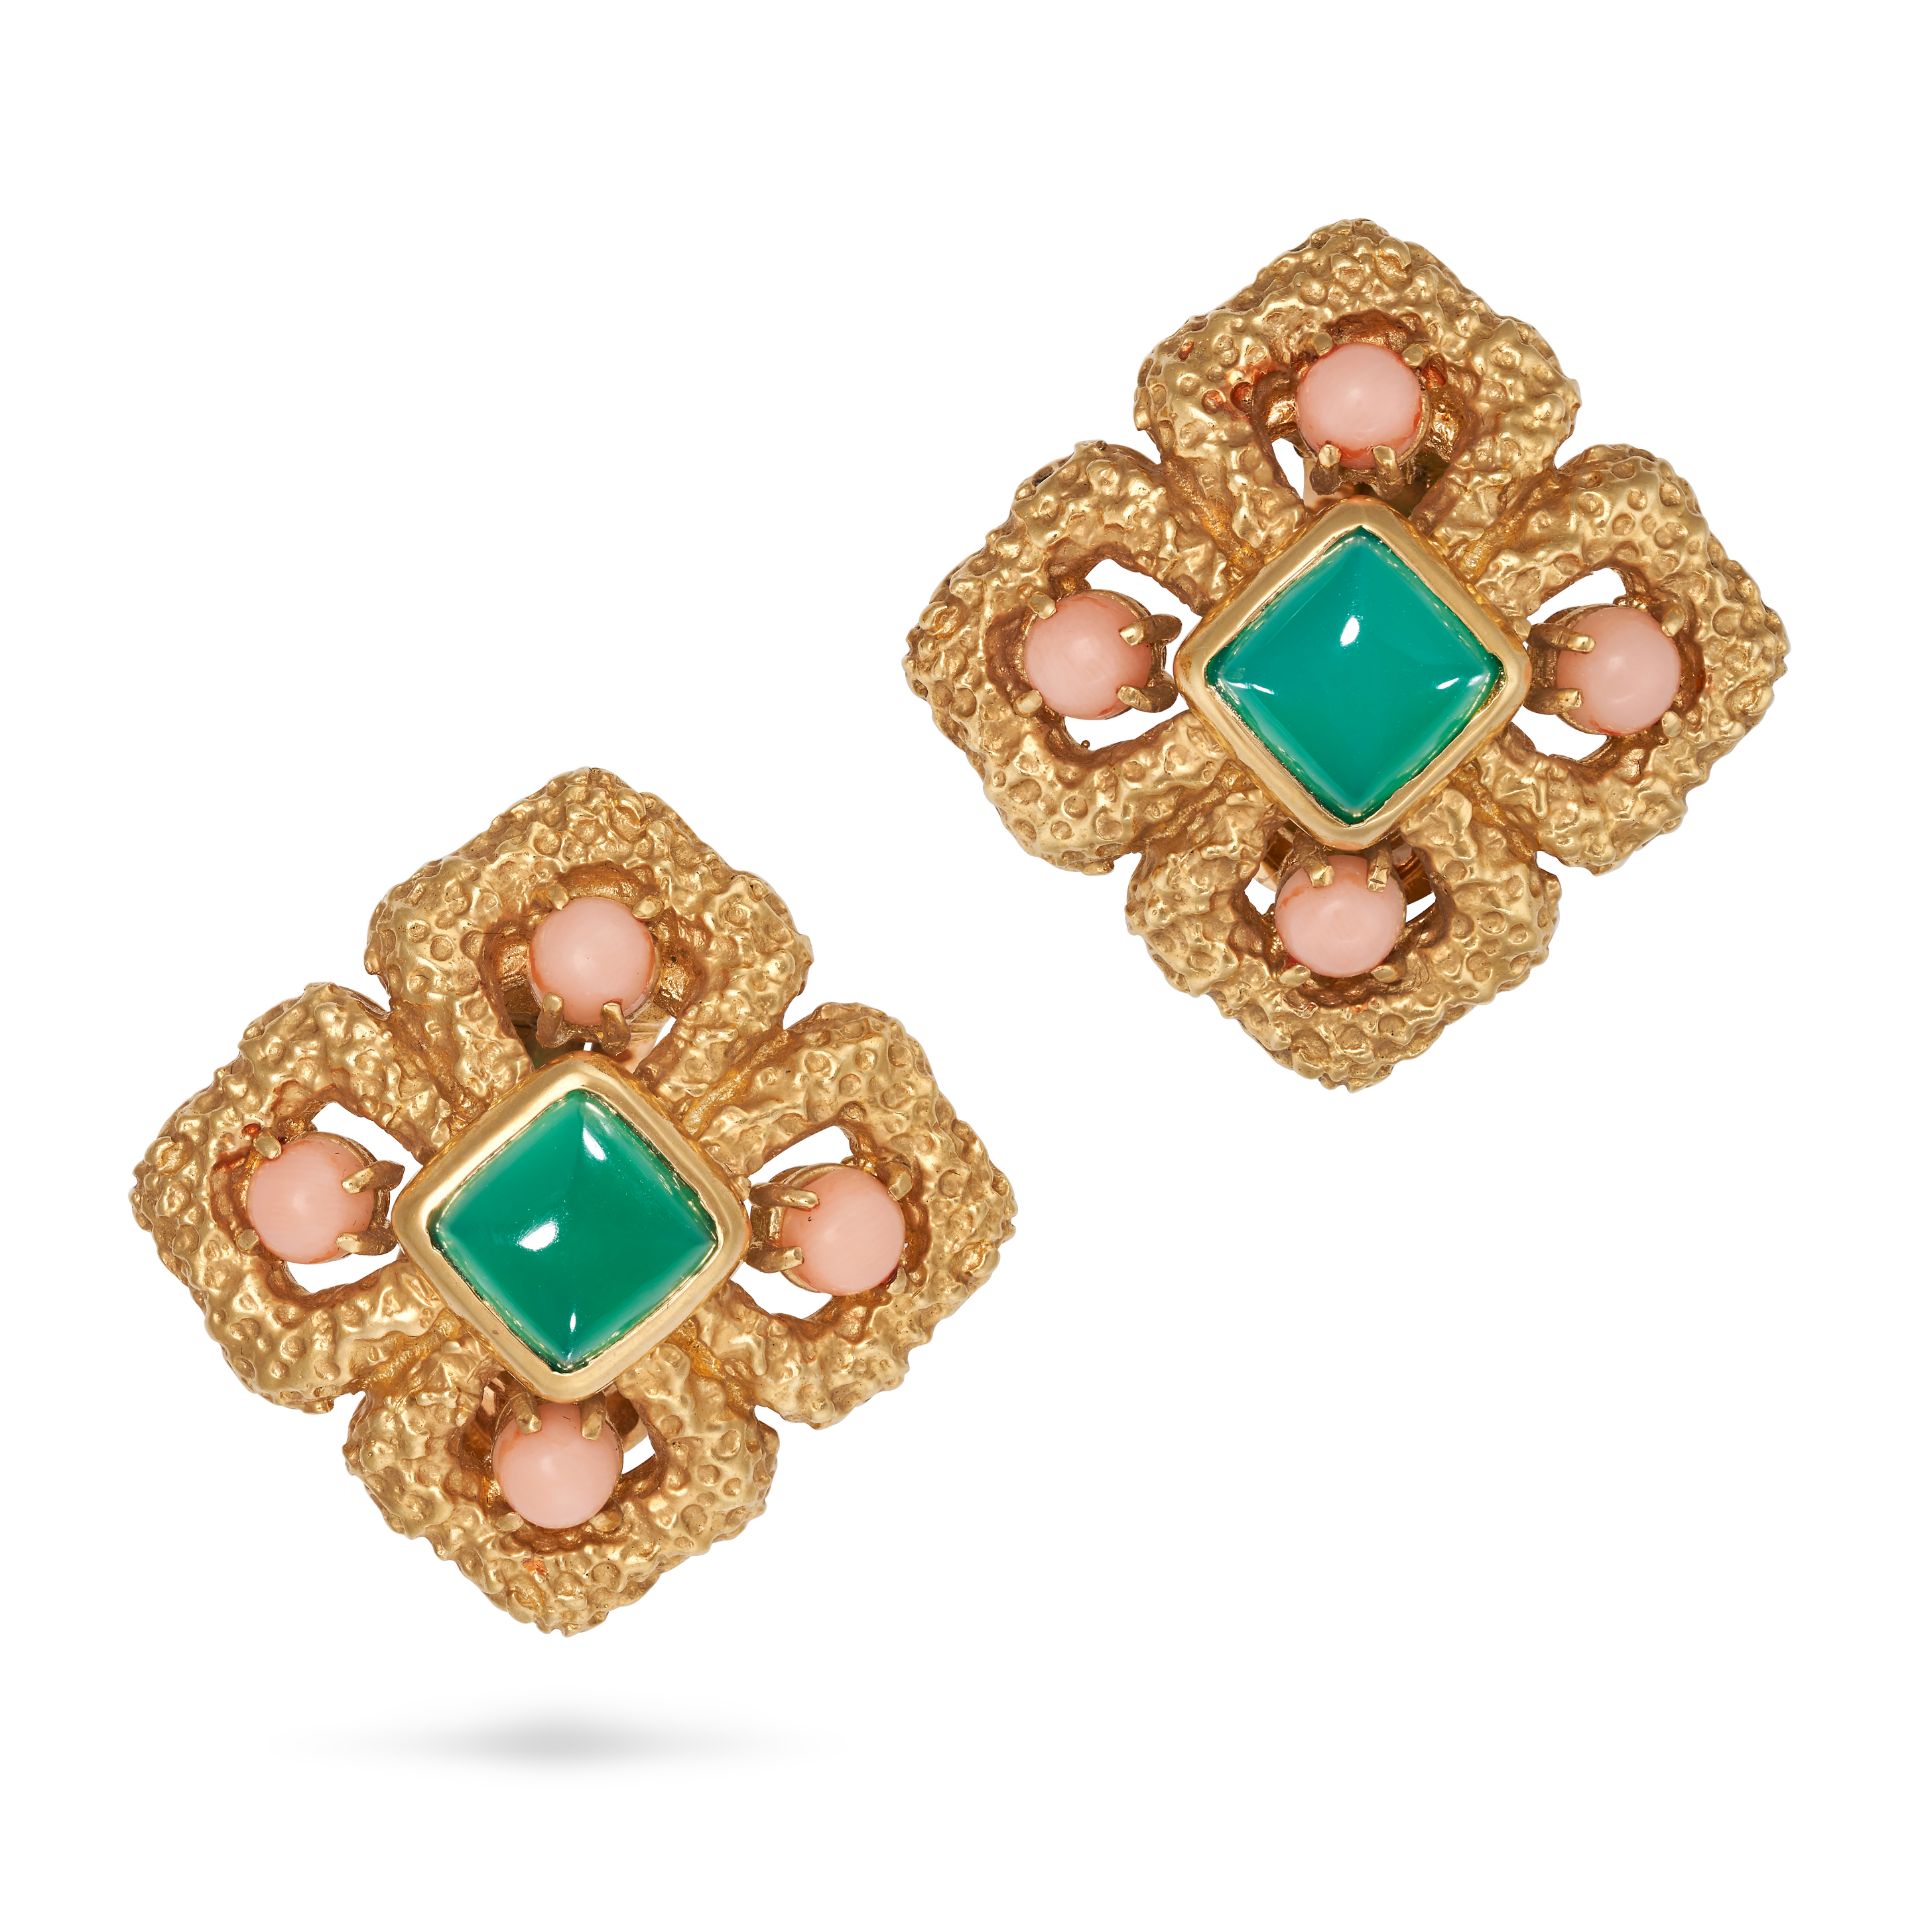 VAN CLEEF & ARPELS, A COLLECTION OF FRENCH CORAL AND CHRYSOPRASE VAN CLEEF & ARPELS JEWELLERY in ... - Bild 4 aus 8